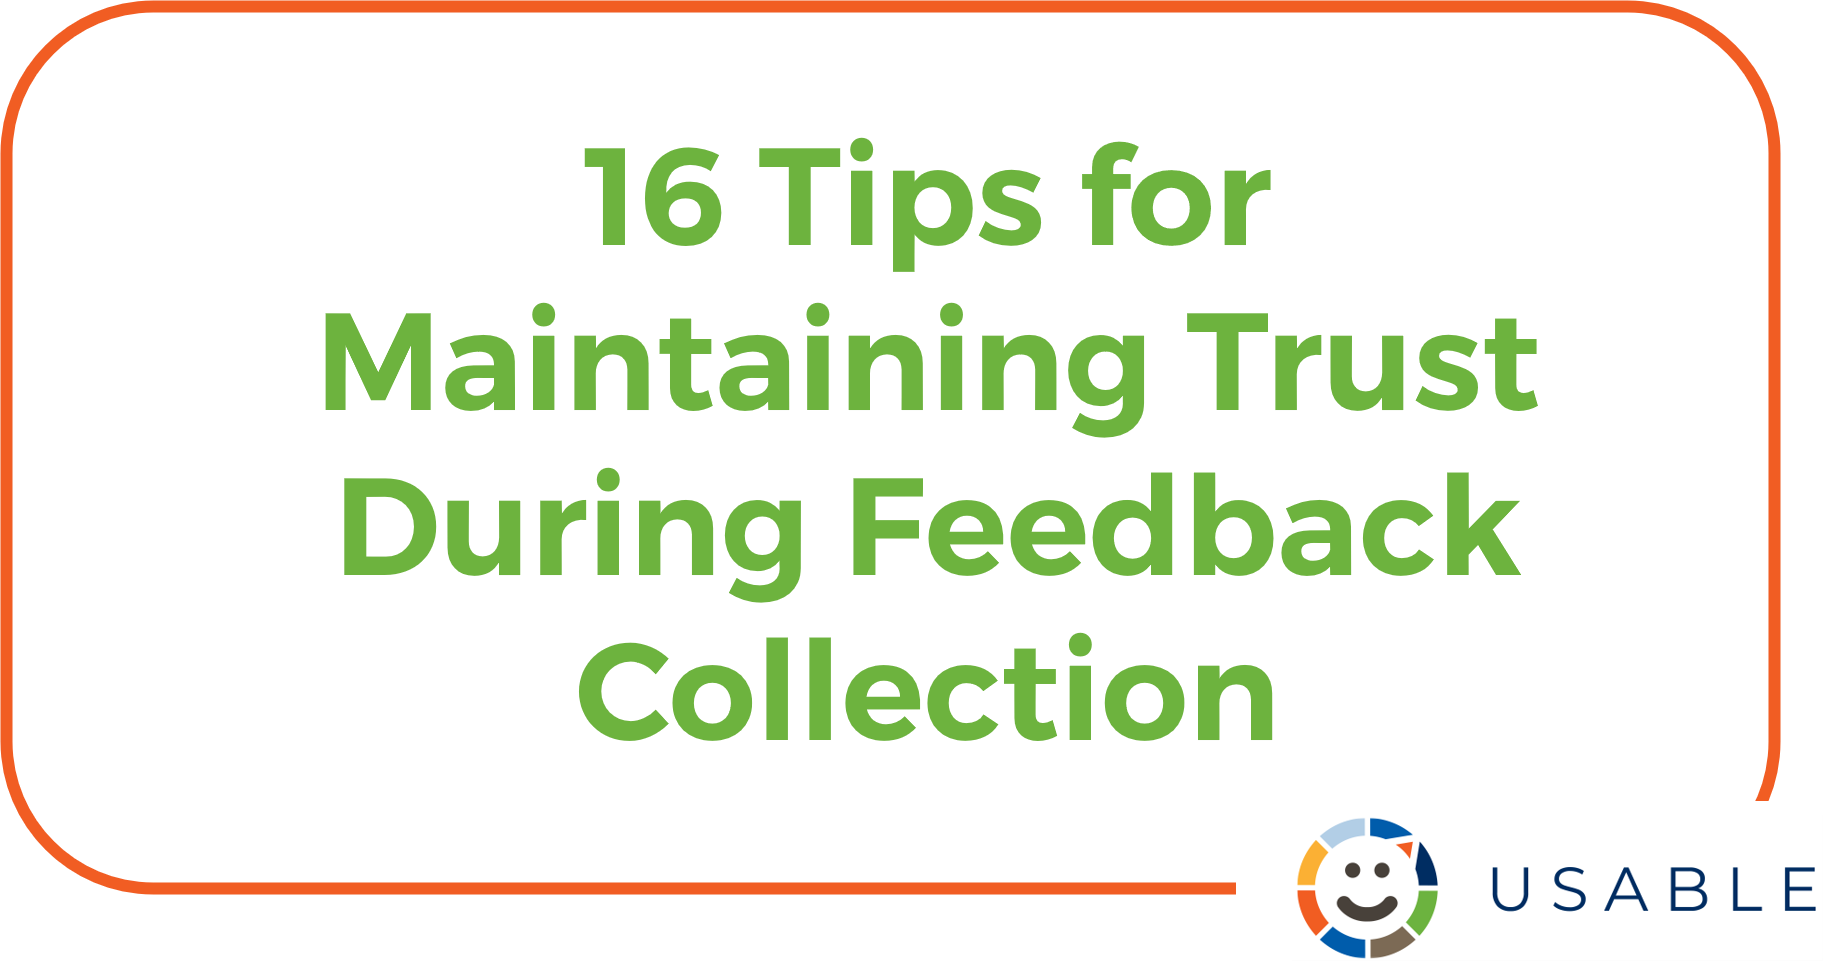 Image with title 16 Tips for Maintaining Trust During Feedback Collection